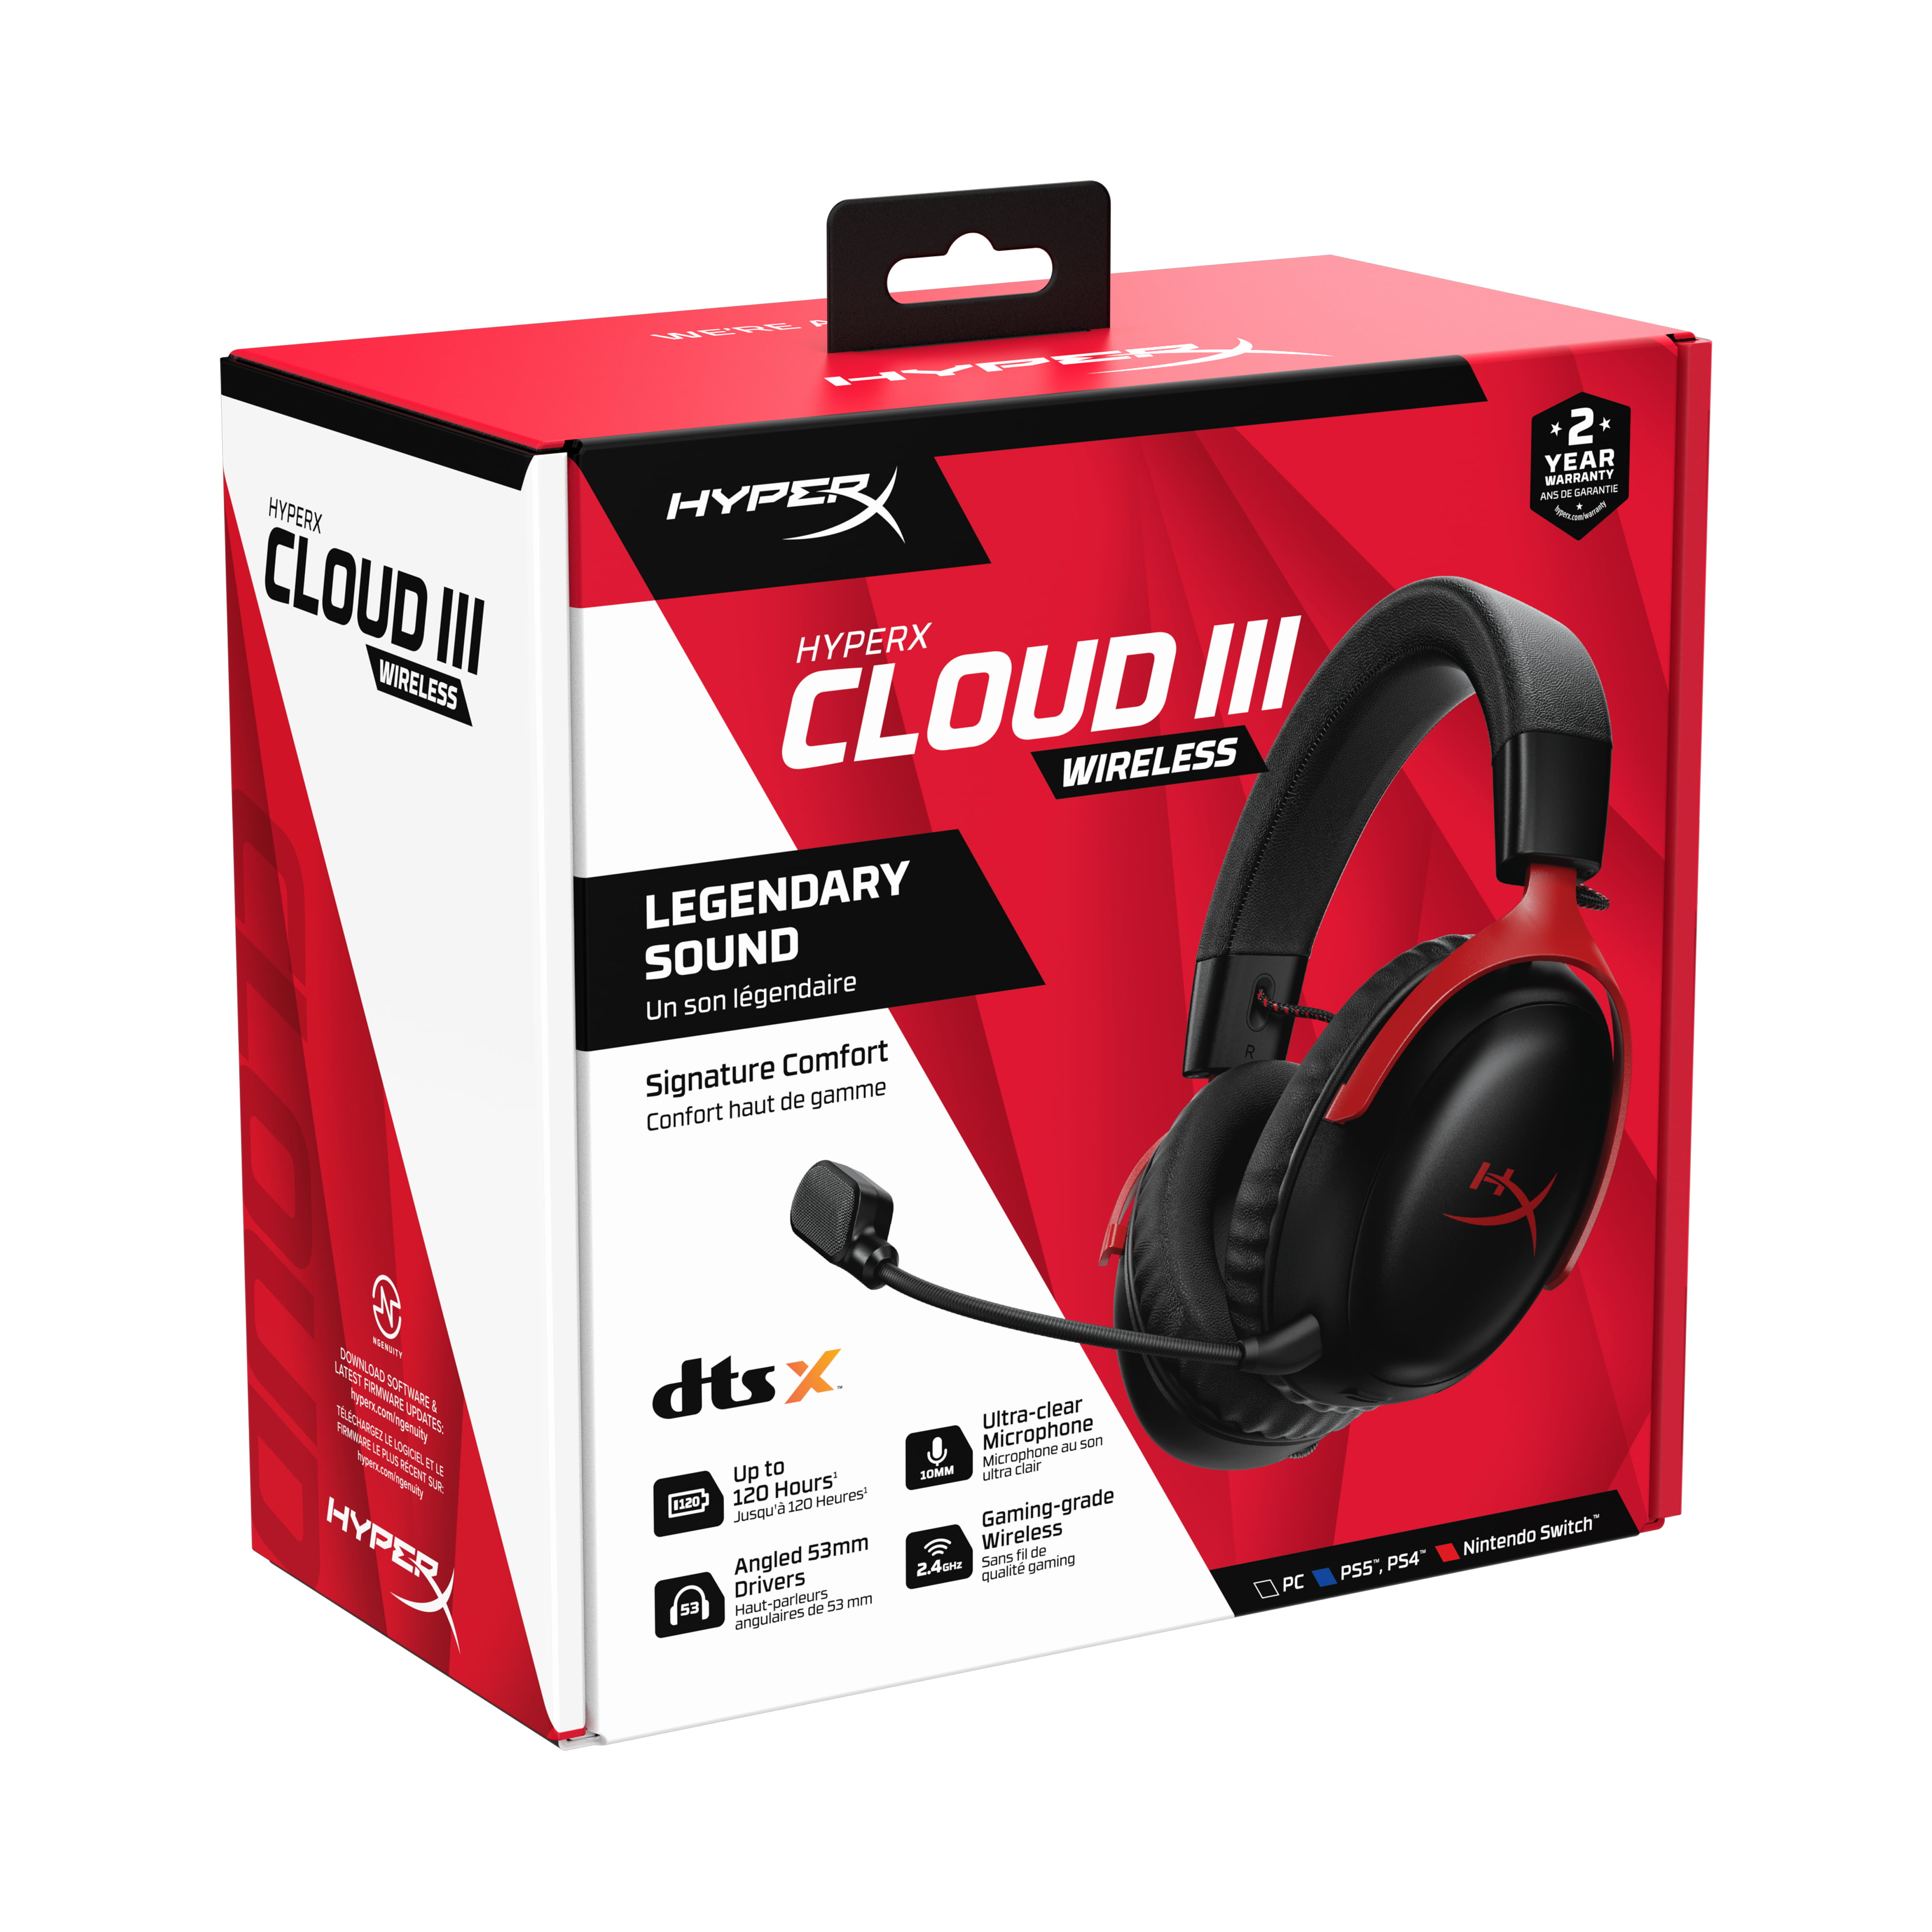 HyperX Cloud III Wireless – Gaming headset for PC, PS5, PS4, up to 120-hour  Battery, 2.4GHz Wireless, 53mm angled drivers, Memory foam, Durable Frame,  10mm microphone – Black/Red